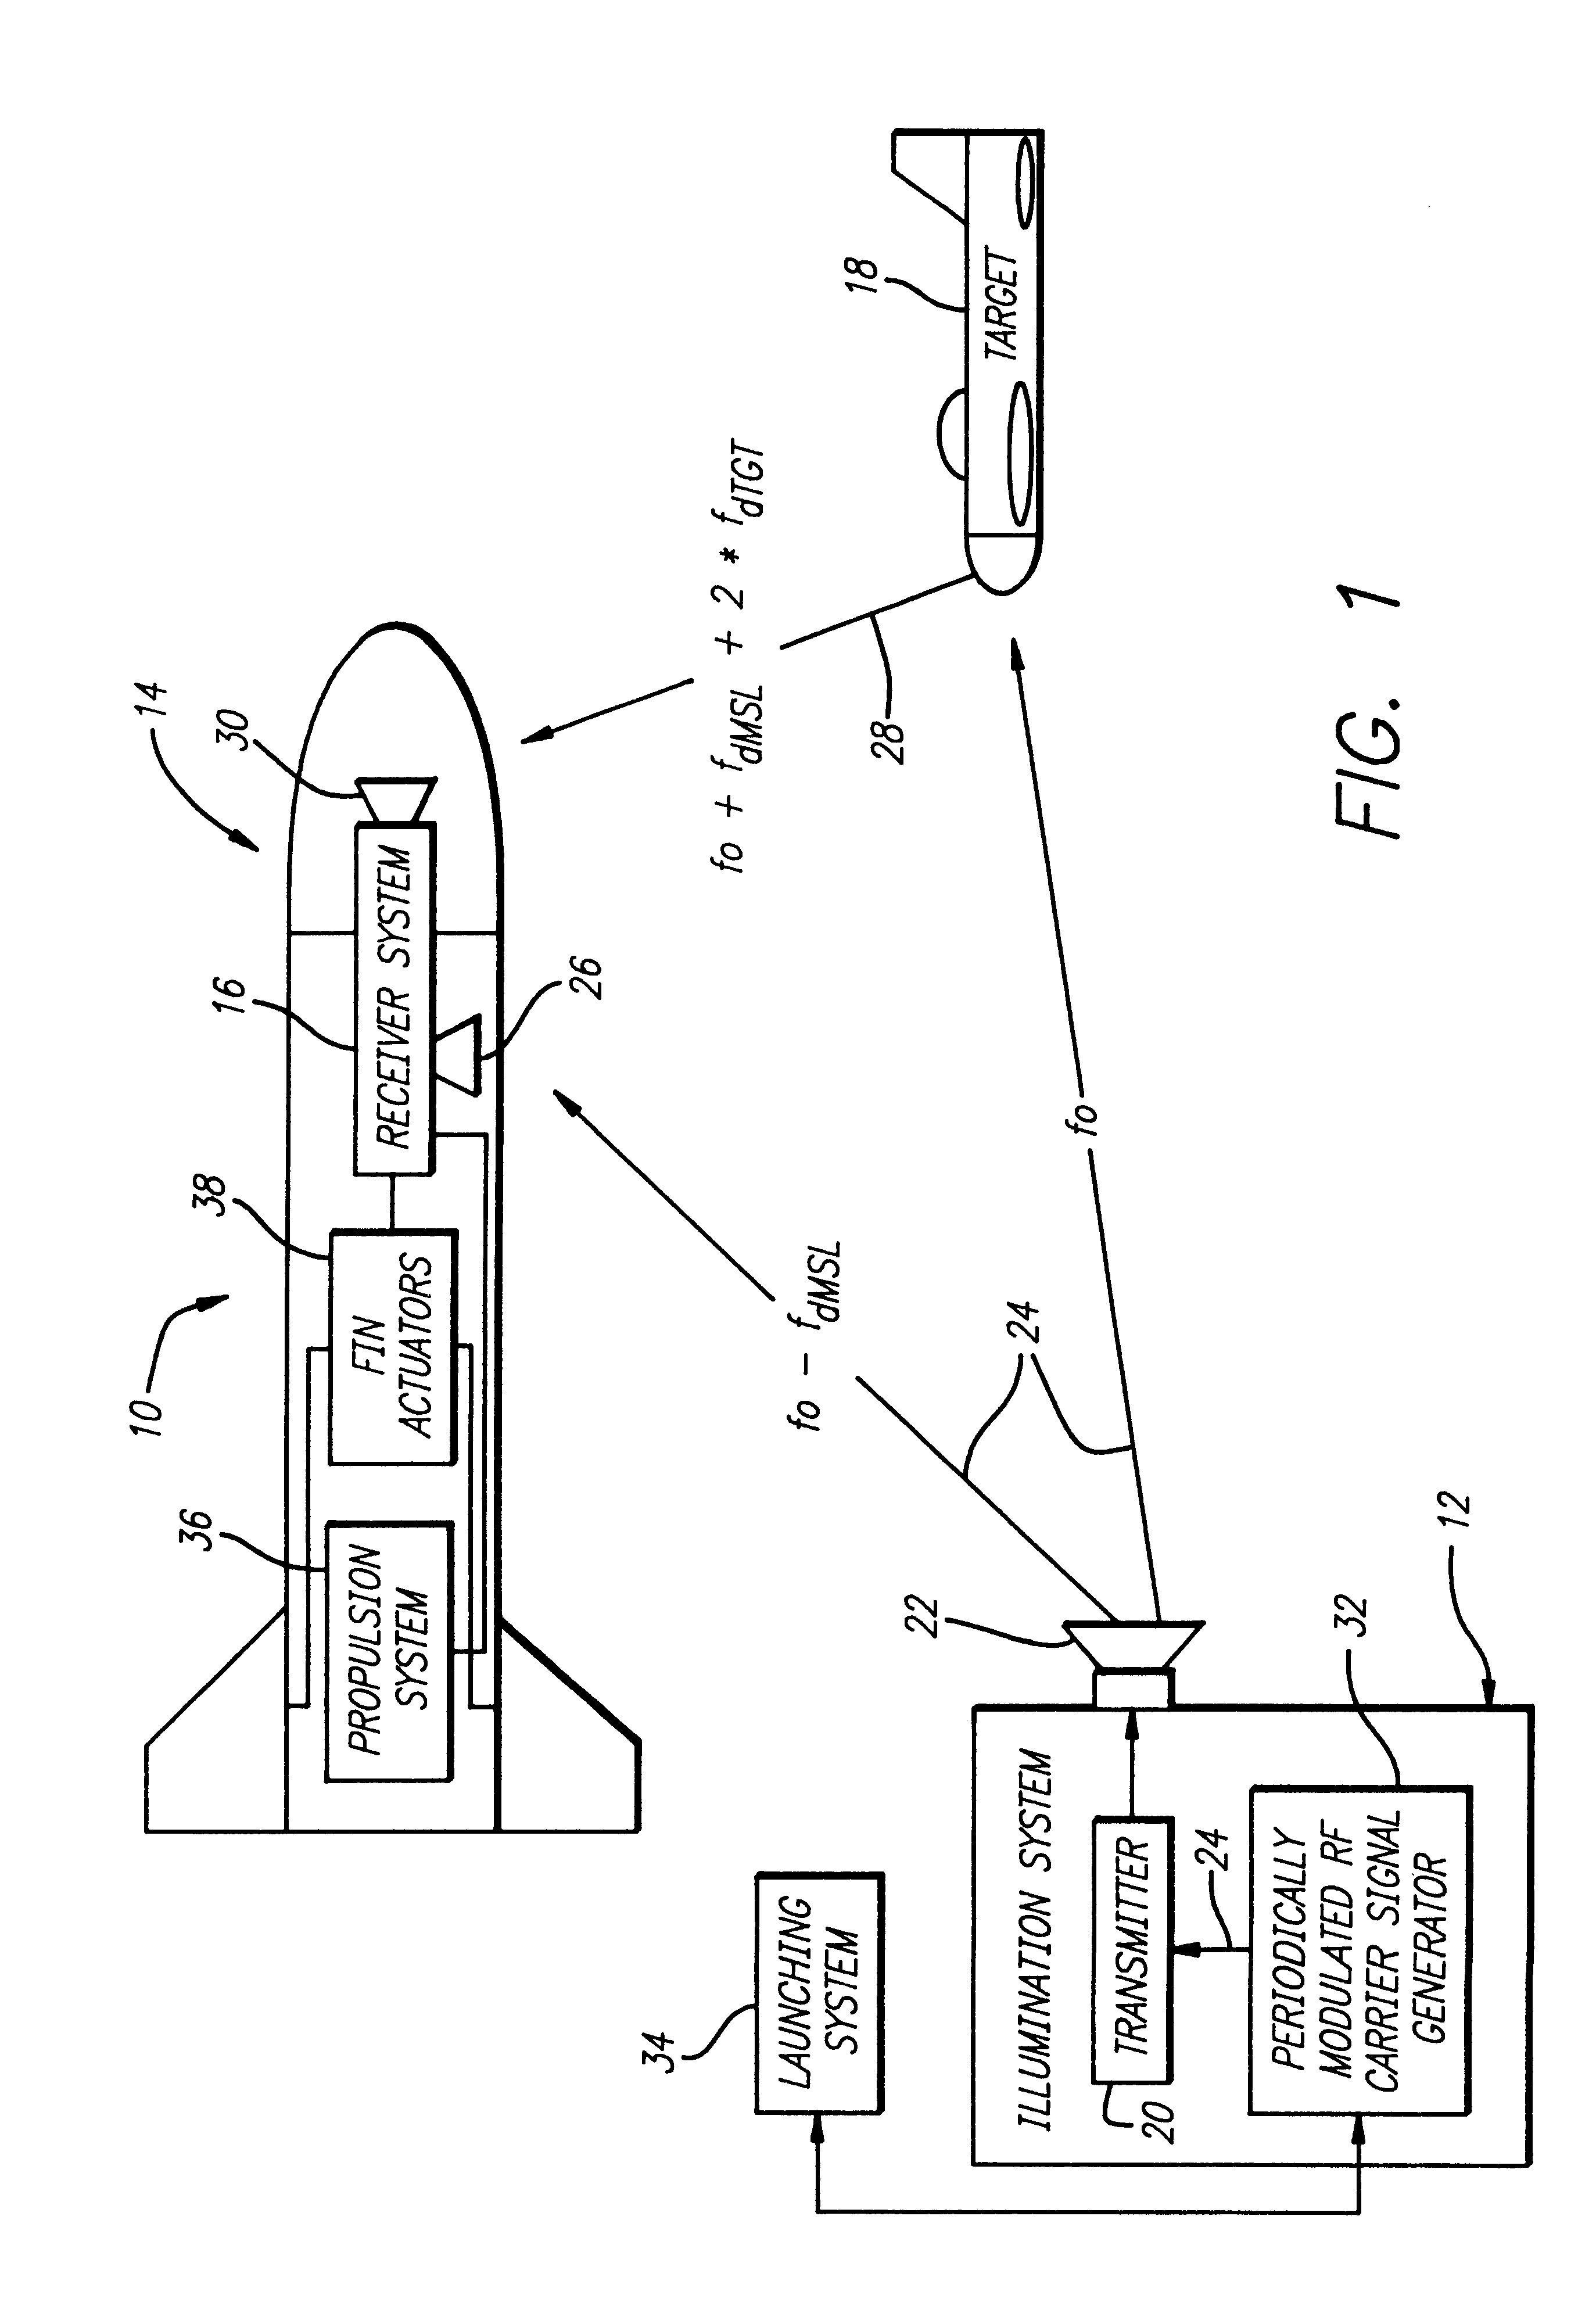 System and method for obtaining precise missile range information for semiactive missile systems